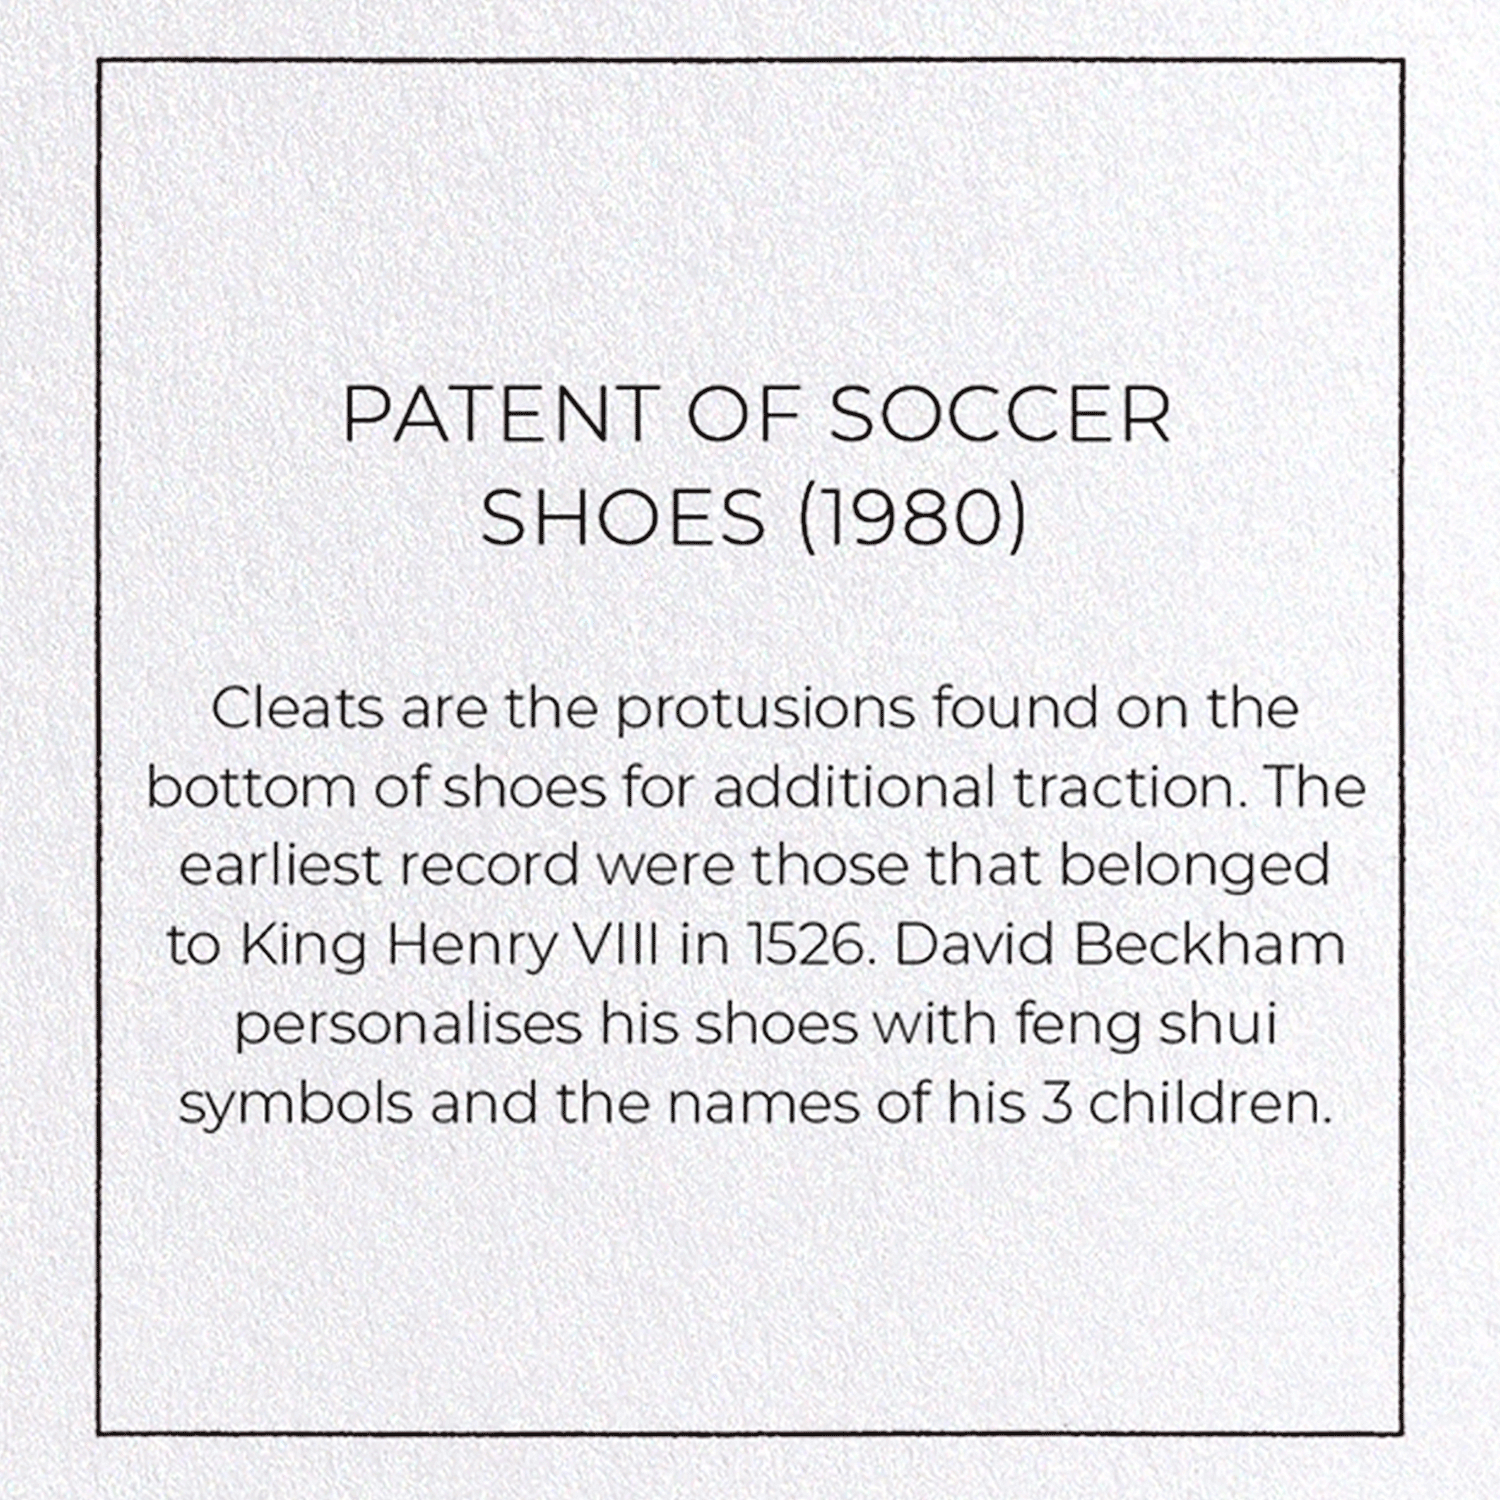 PATENT OF SOCCER SHOES (1980)